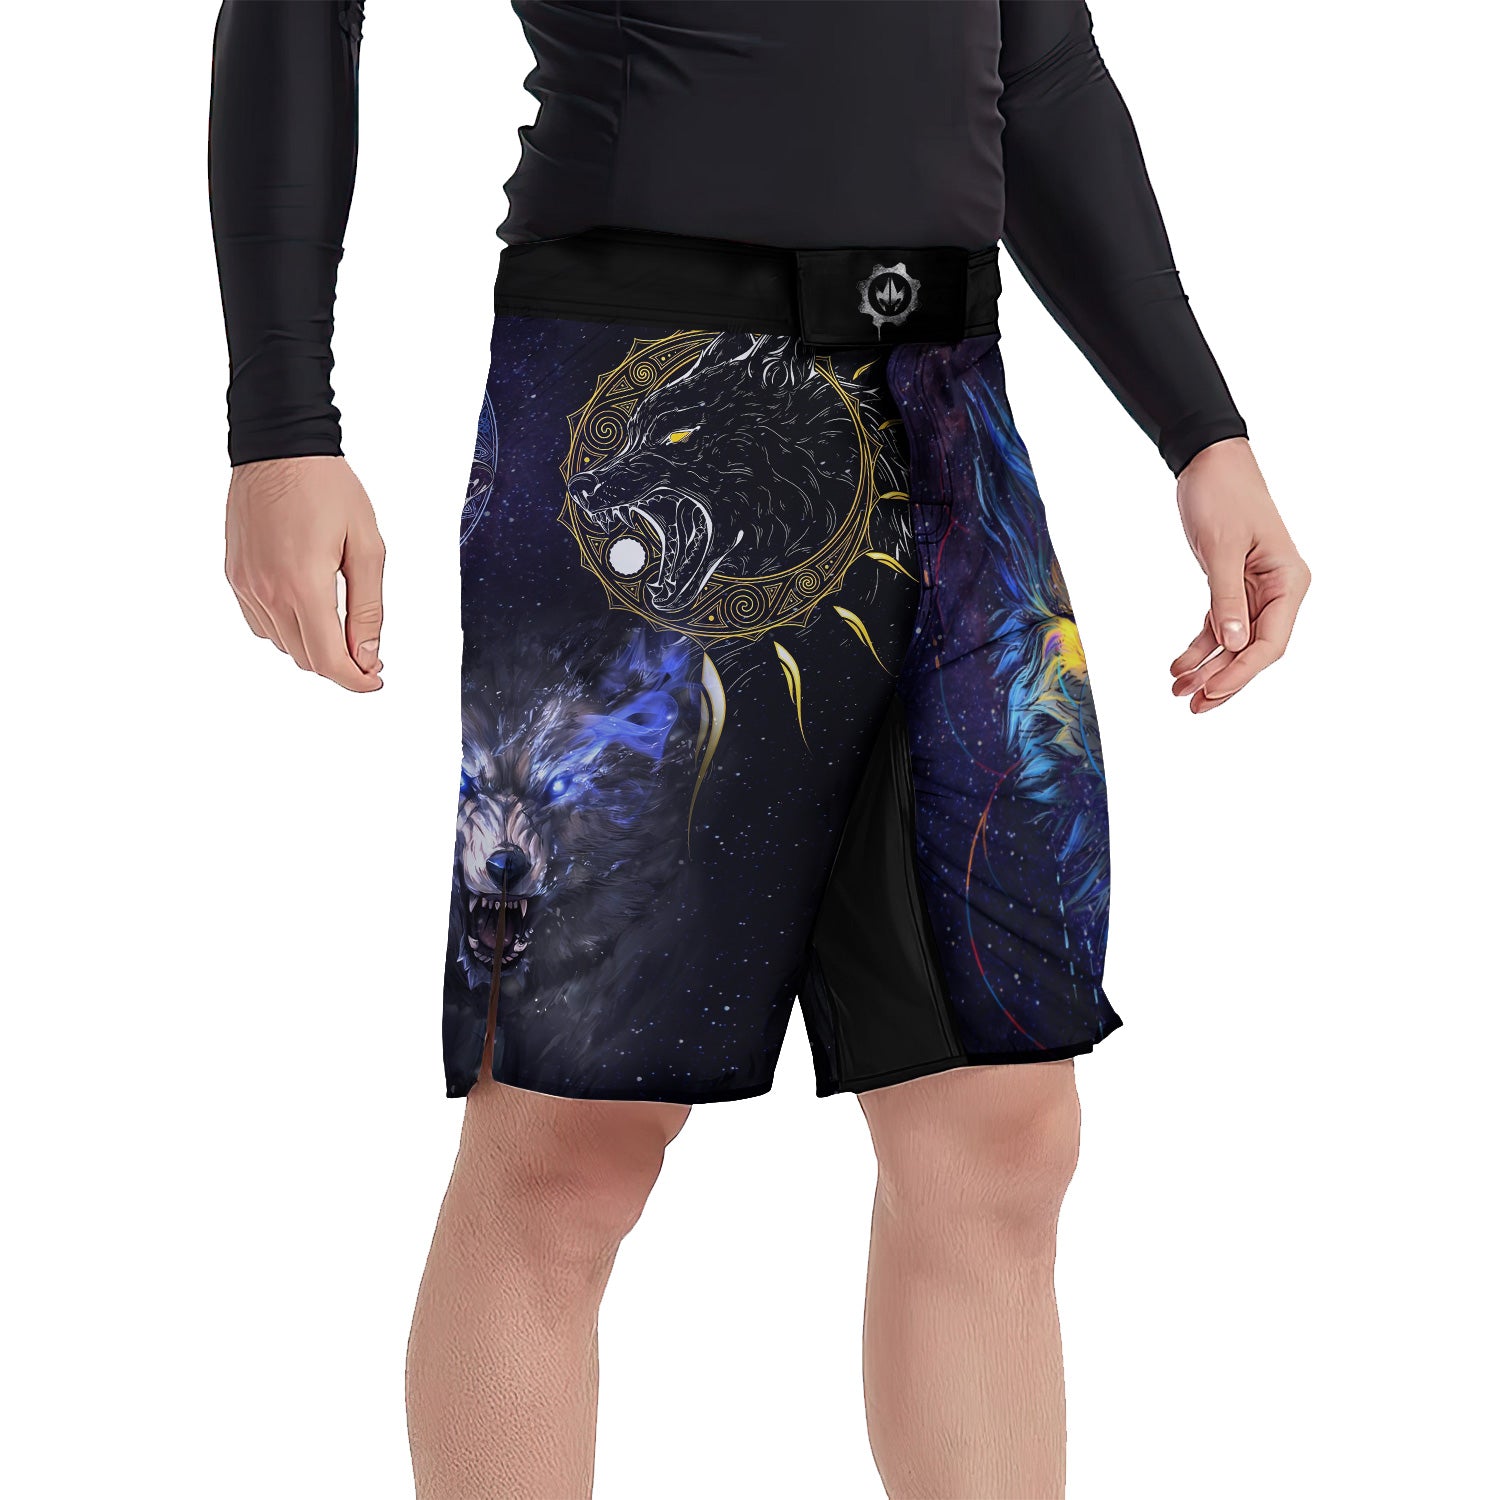 Sun and Moon Wolf Entities Fight Shorts